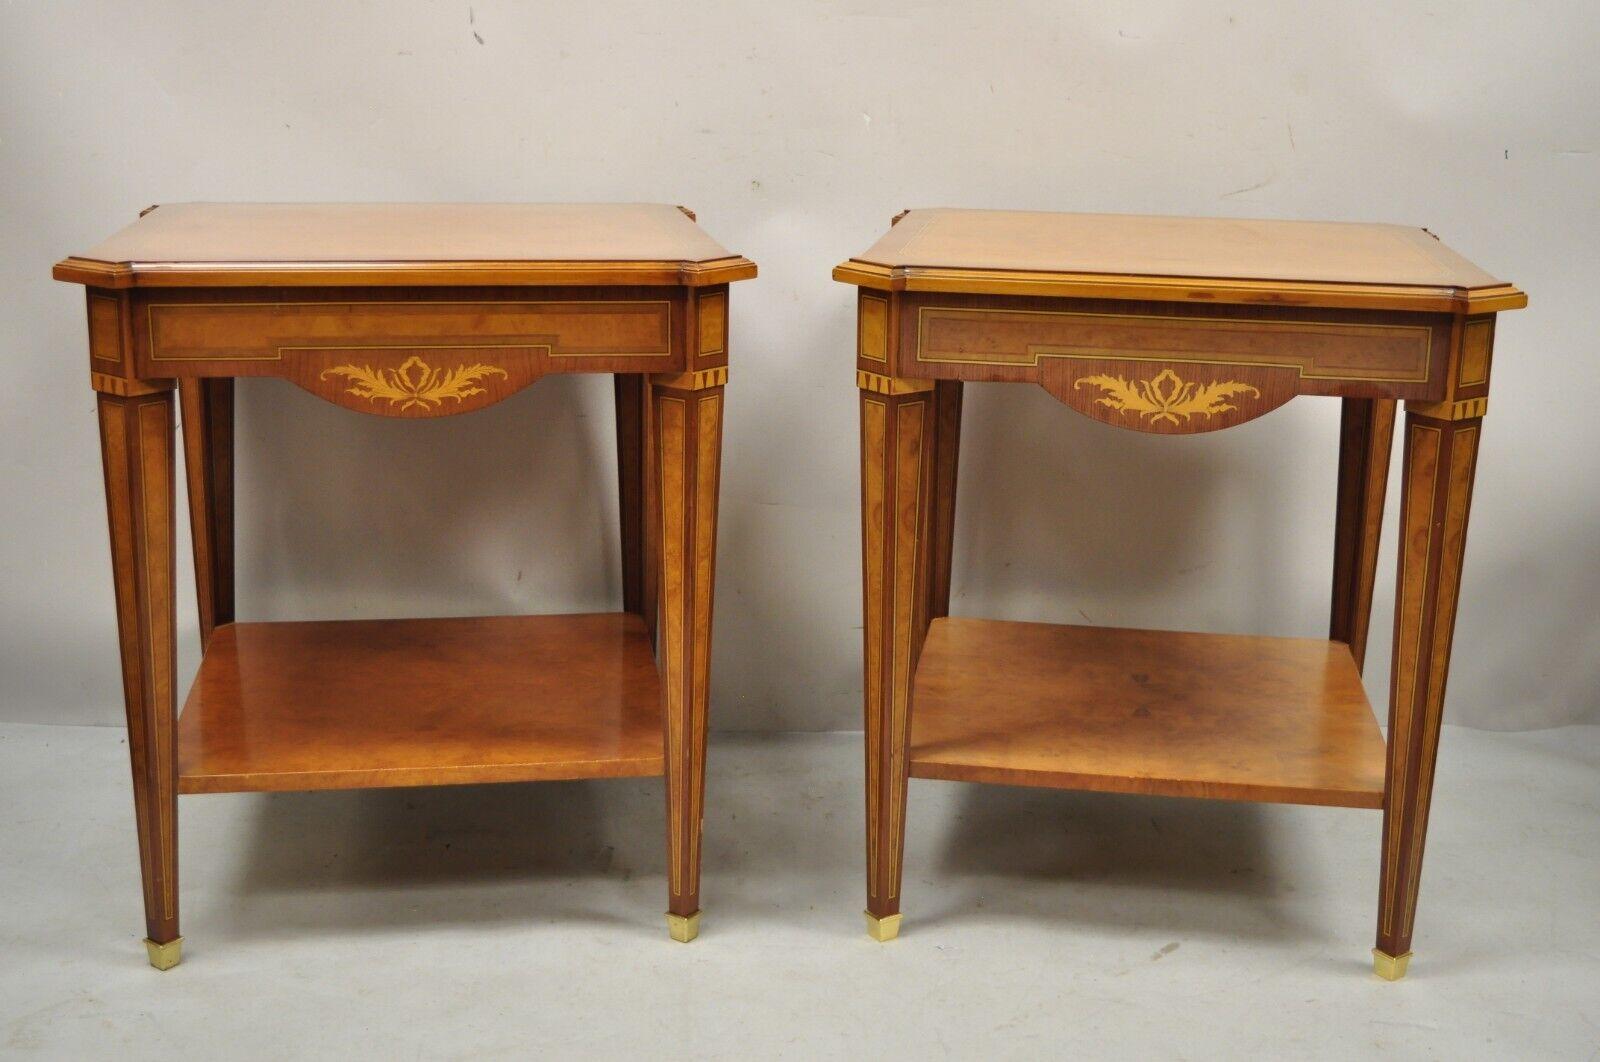 French Louis XVI Style Satinwood Inlay Side End Tables by Mudeva - a Pair. Item features brass capped feet, 2 tiers, satinwood inlay, solid wood construction, beautiful wood grain, original label, tapered legs, quality craftsmanship, great style and